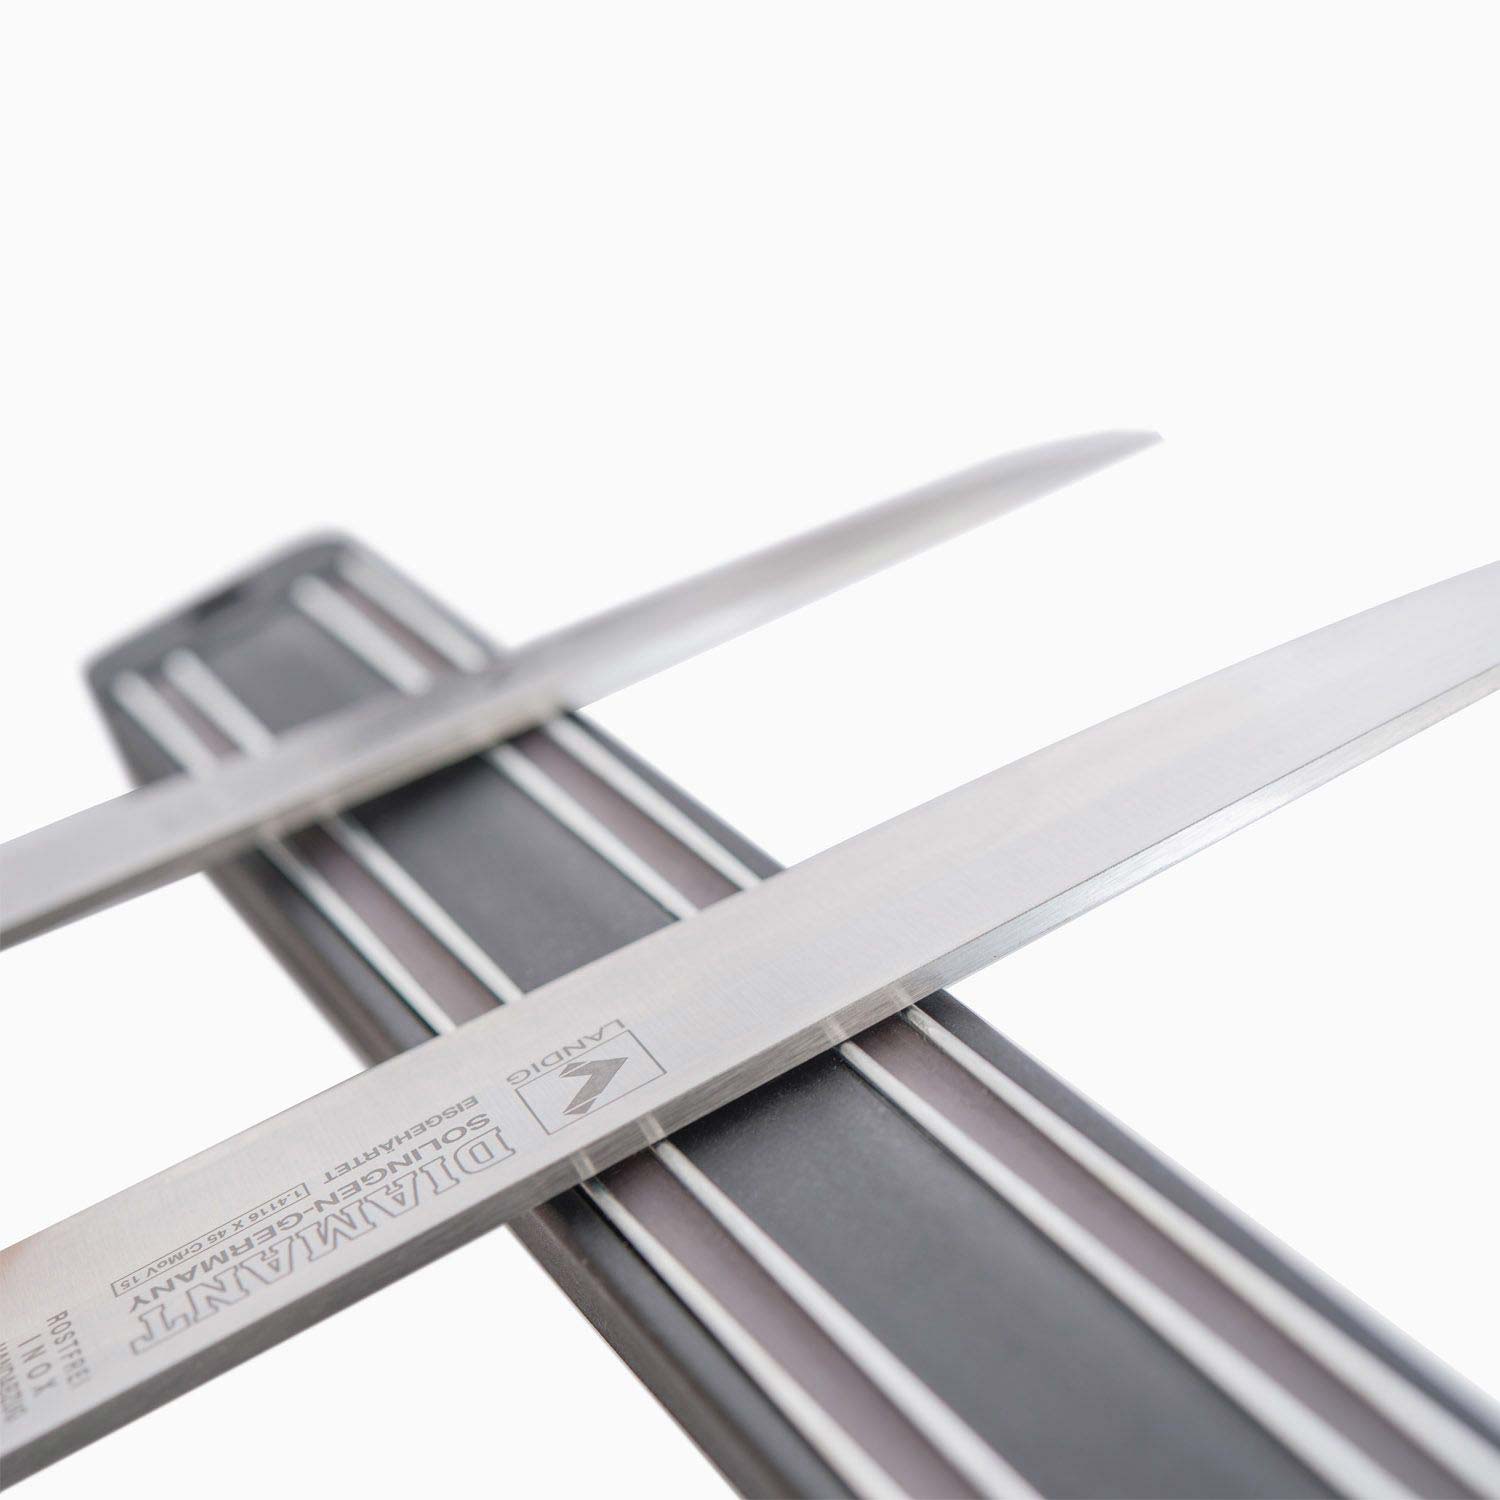 Detail of magnetic strip for knives